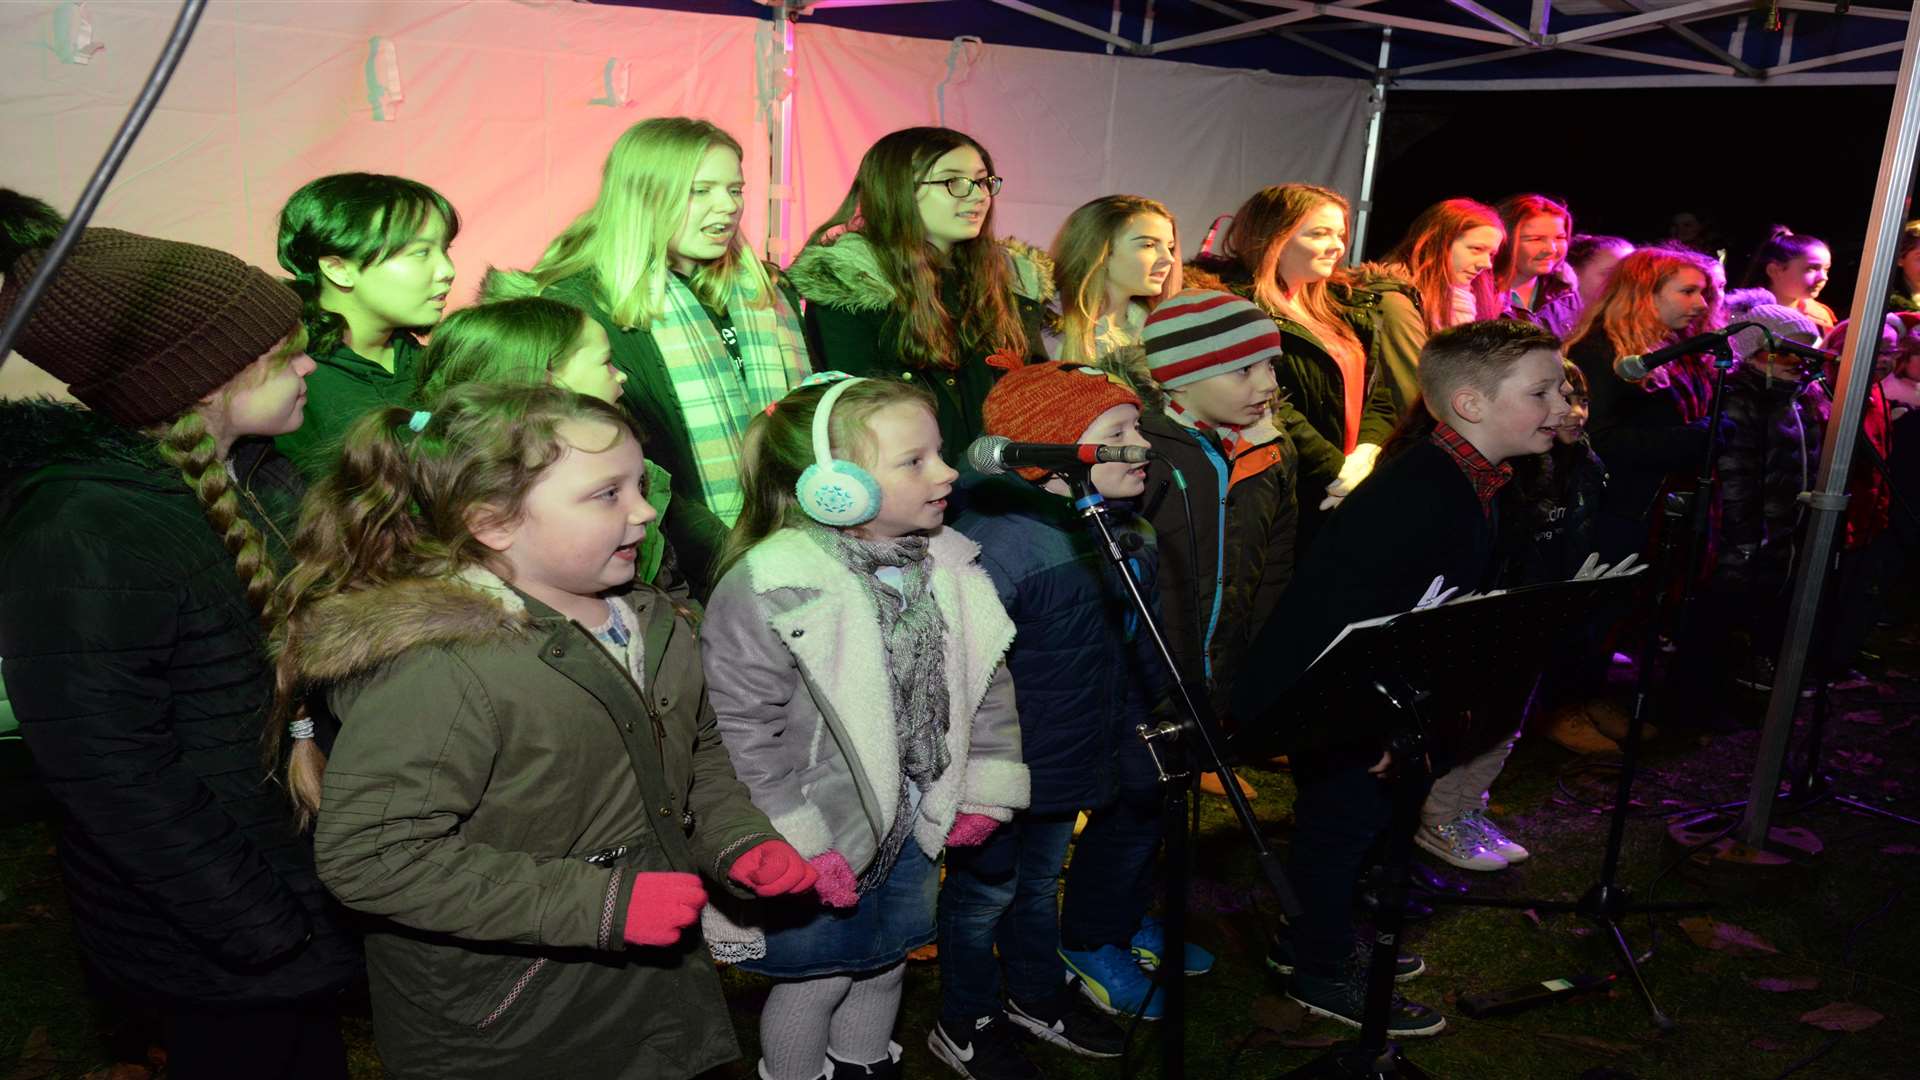 Vocademy perform at the Bearsted Christmas lights switch-on during Saturday evening.